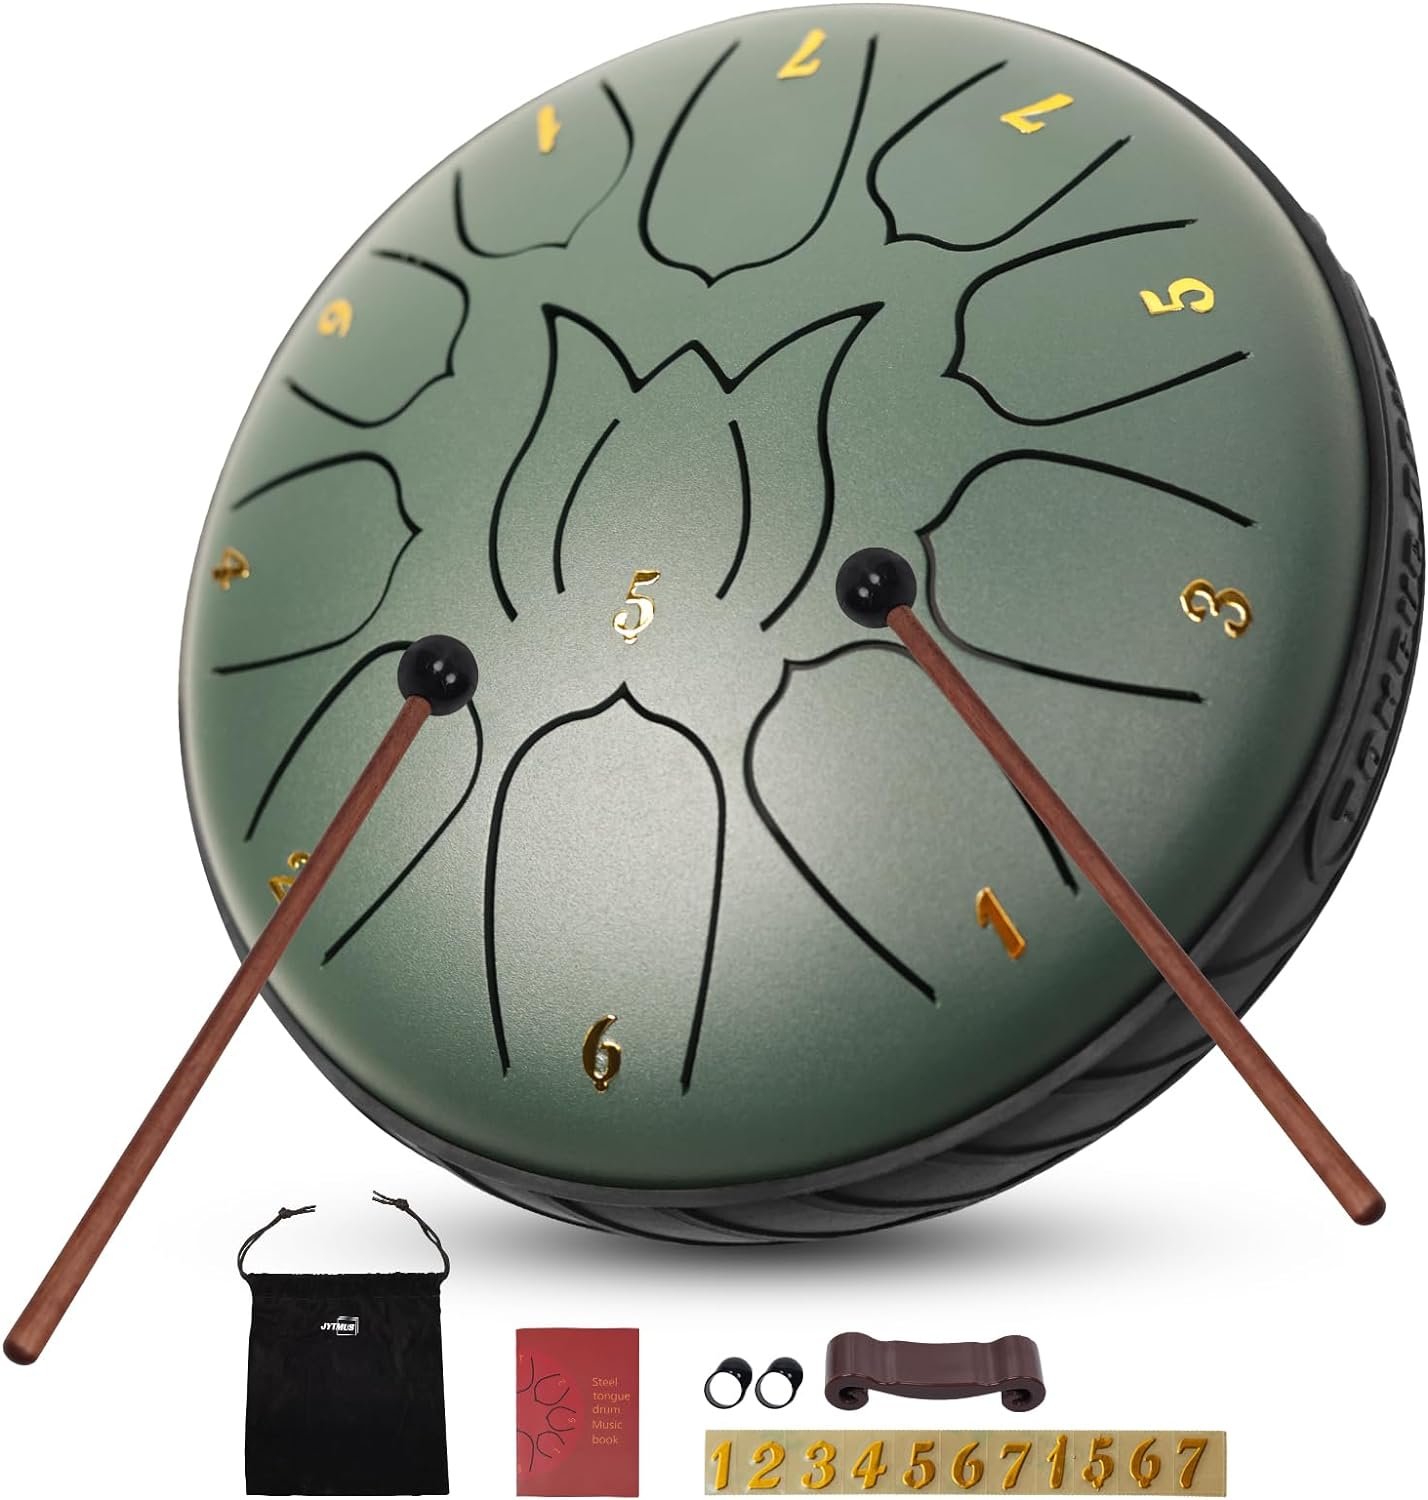 JYTMUS Steel Tongue Drum 11 Notes 6 Inches, D Major Percussion Instruments, Steel Drum Kit with Music Book, Carry Bag, Drum Mallets, Mallet Holder and Stickers, Tongue Drum for Yoga, Meditation